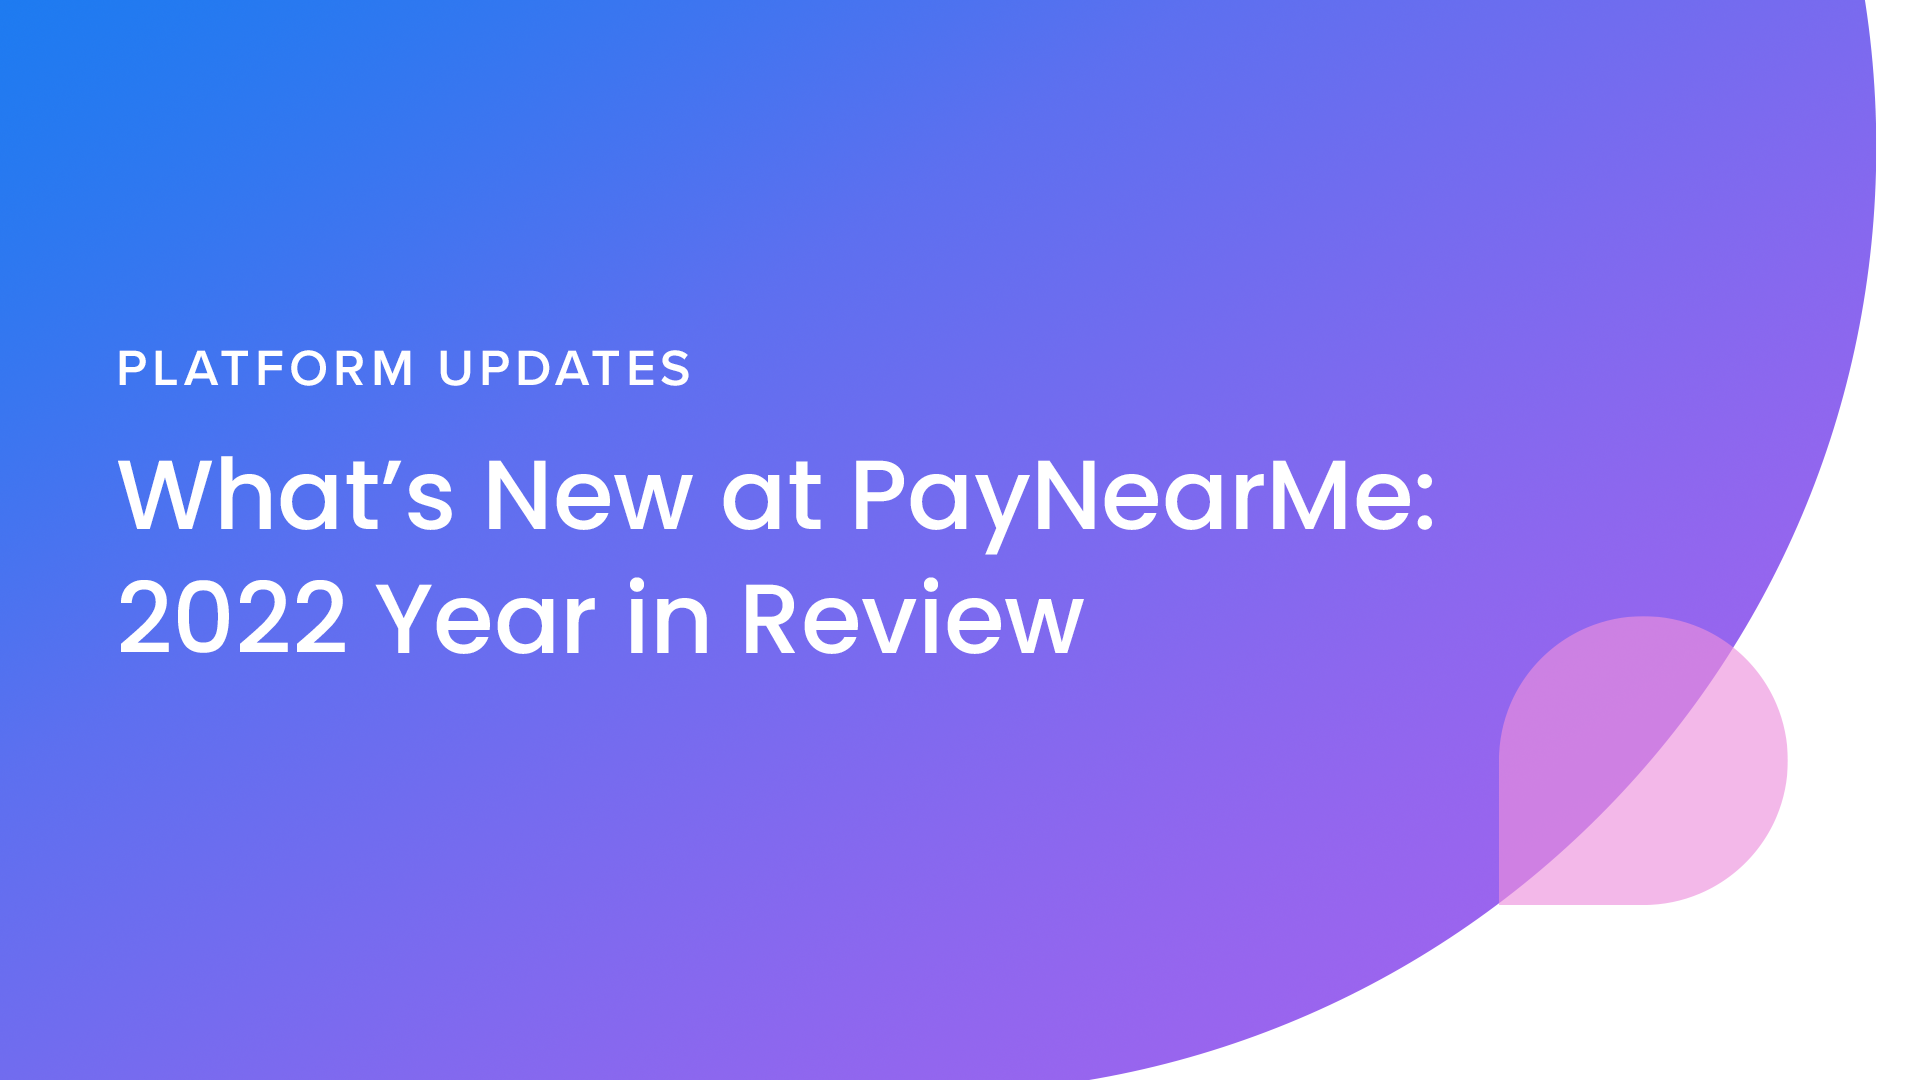 What’s New at PayNearMe: 2022 Year in Review